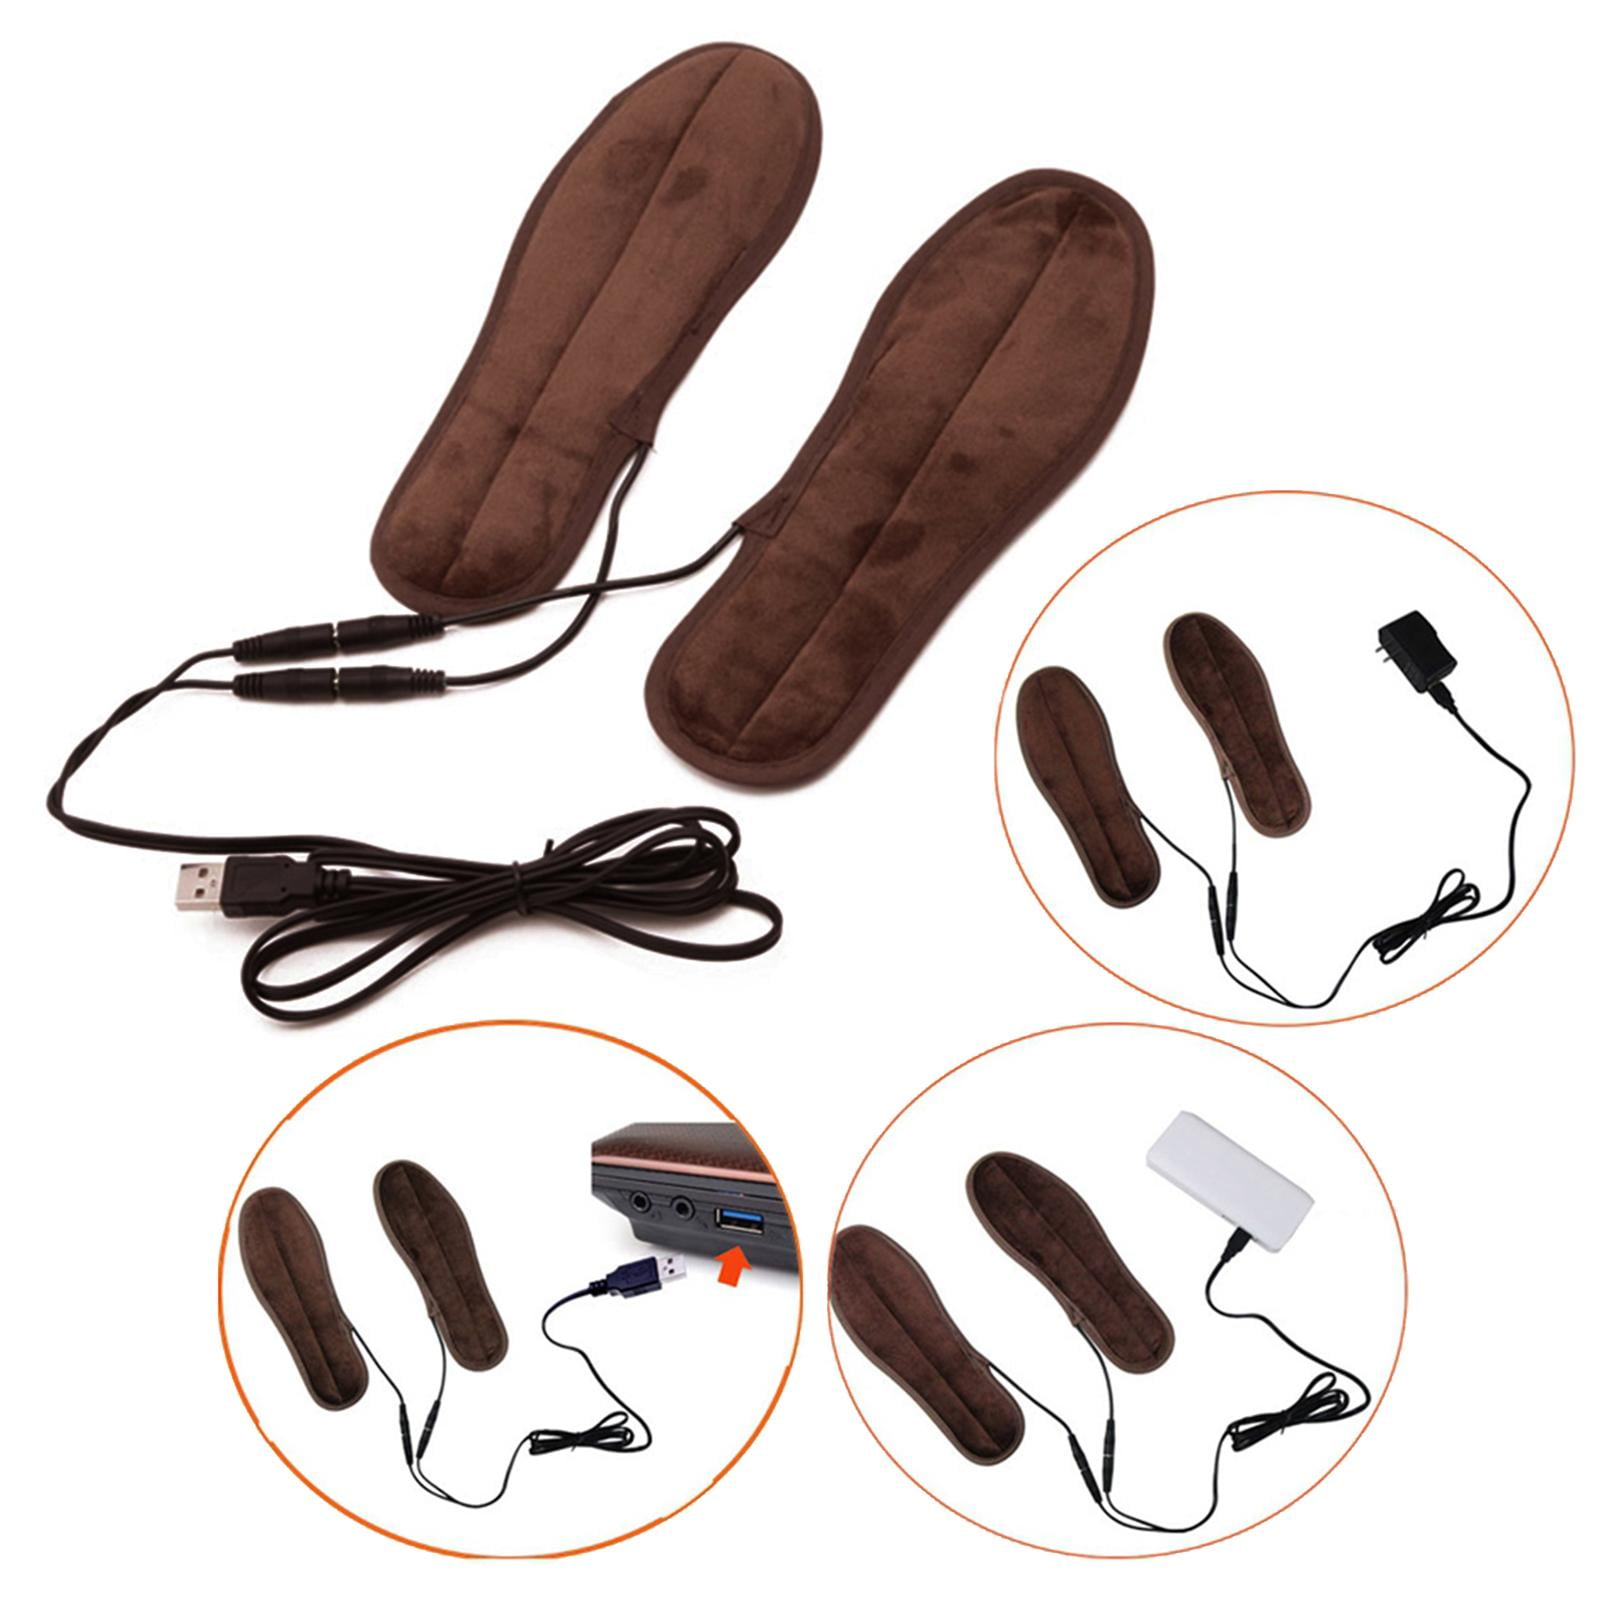 Details about   USB Electric Heated Adjustable Shoe Insoles Warm Feet Socks Heater Foot Winter 